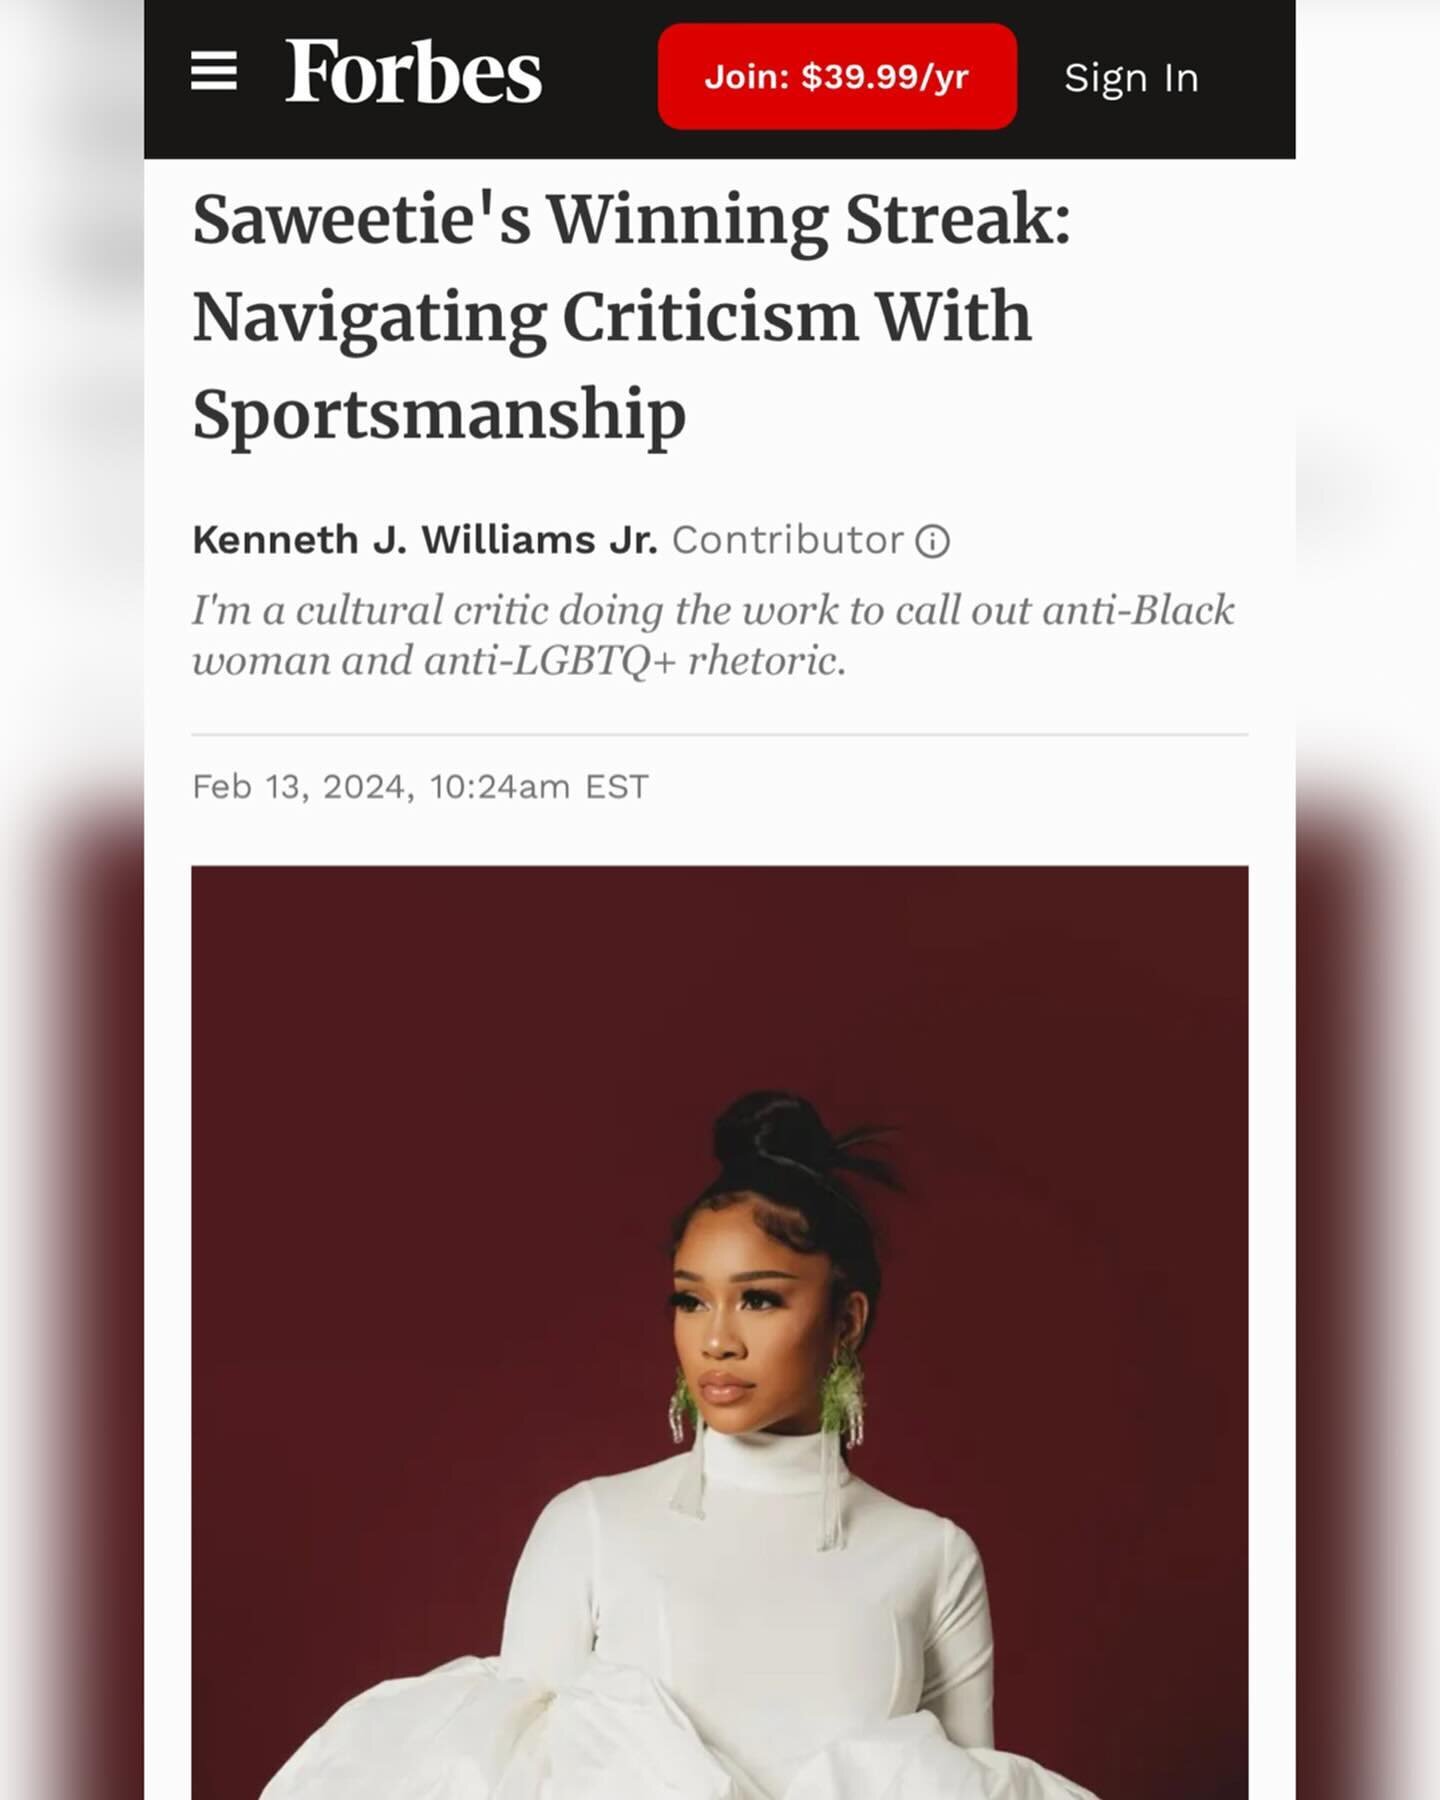 ❄️ NEW INTERVIEW ALERT ❄️ 

I can&rsquo;t believe I got to interview one of my favorite rappers, @saweetie! When she debuted in 2018, I was graduating from my master&rsquo;s program at @michiganstateu and since then, I&rsquo;ve been so inspired by he